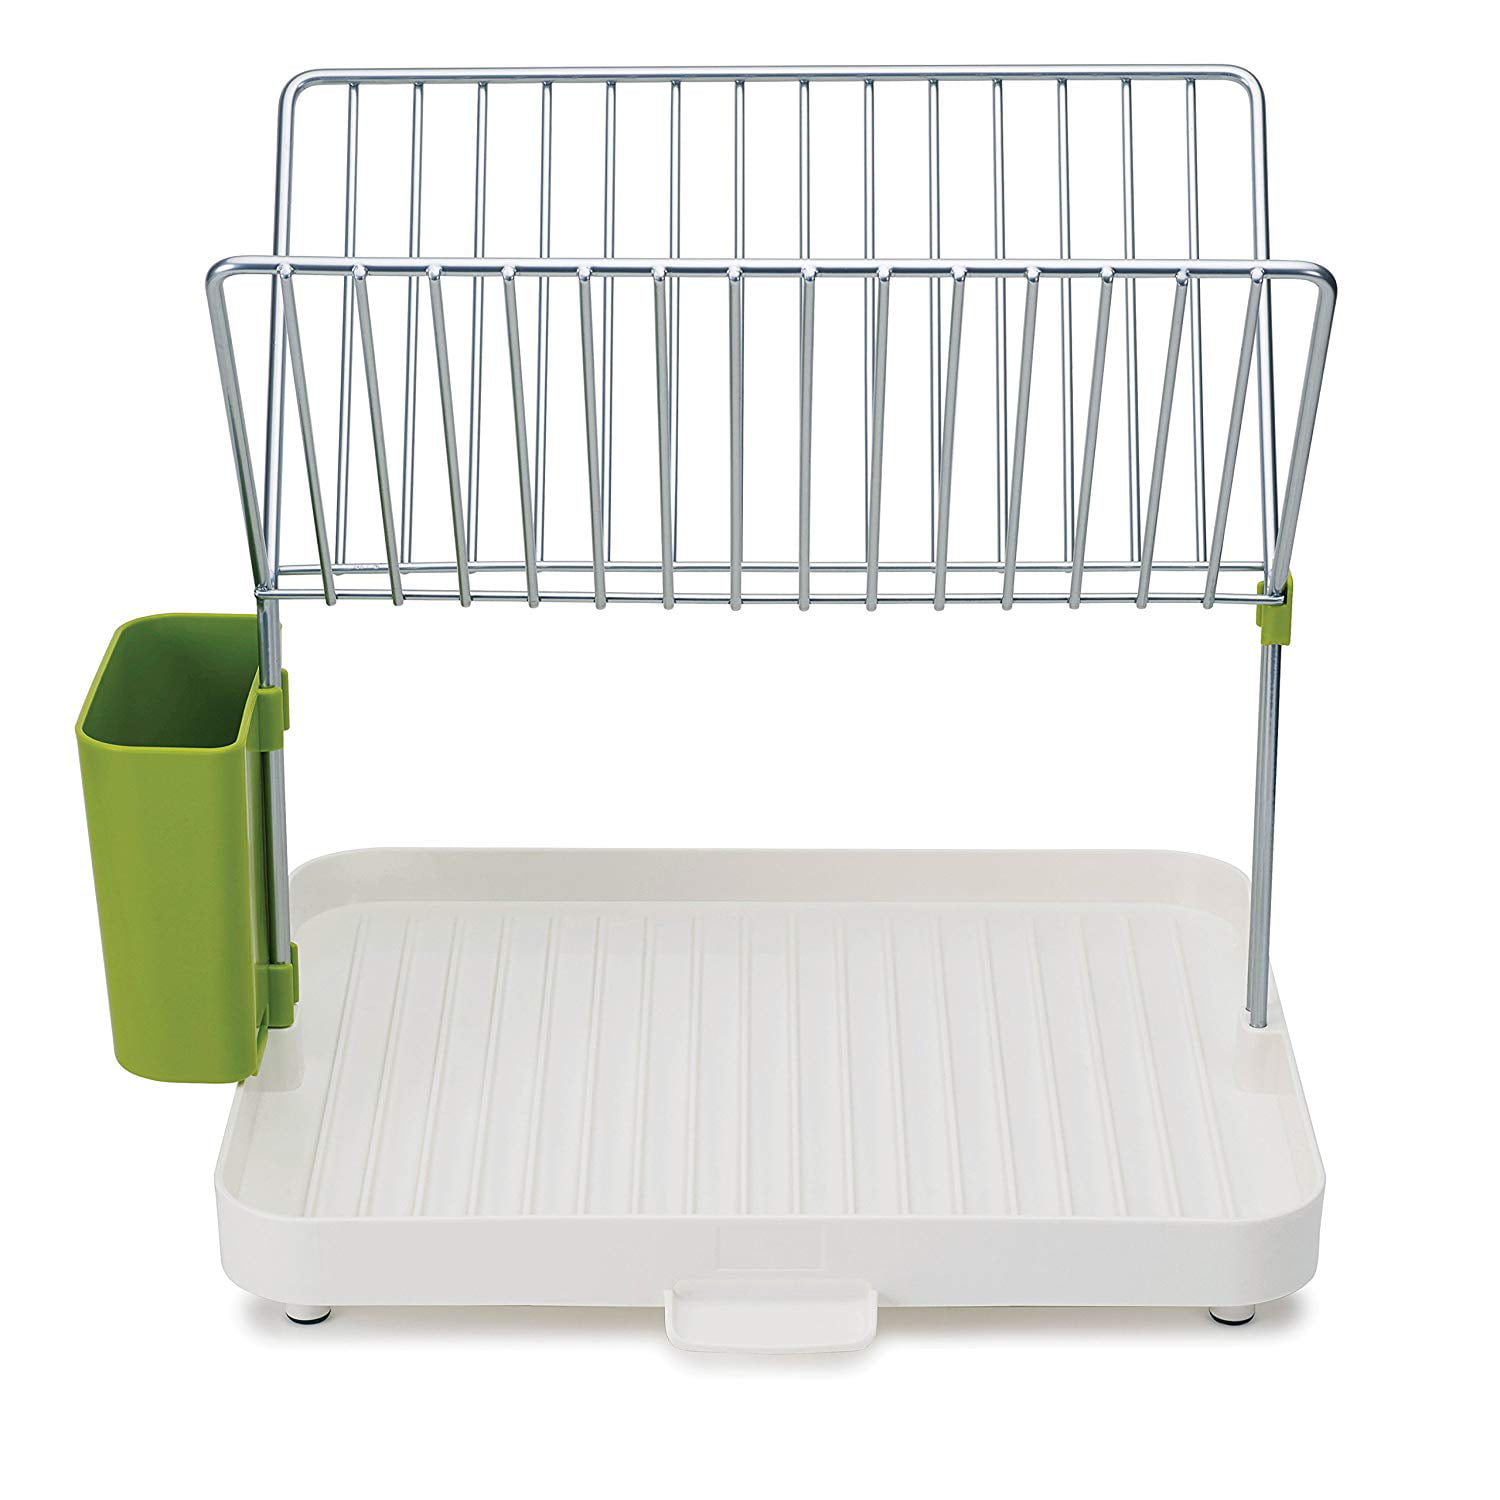 HERJOY Dish Drying Rack, Detachable 2 Tier Dish Rack and Drainboard Set,  Large Capacity Dish Drainer Organizer Shelf with Utensil Holder, Cup Rack  for Kitchen Counter, White MSRP $39.99 Auction